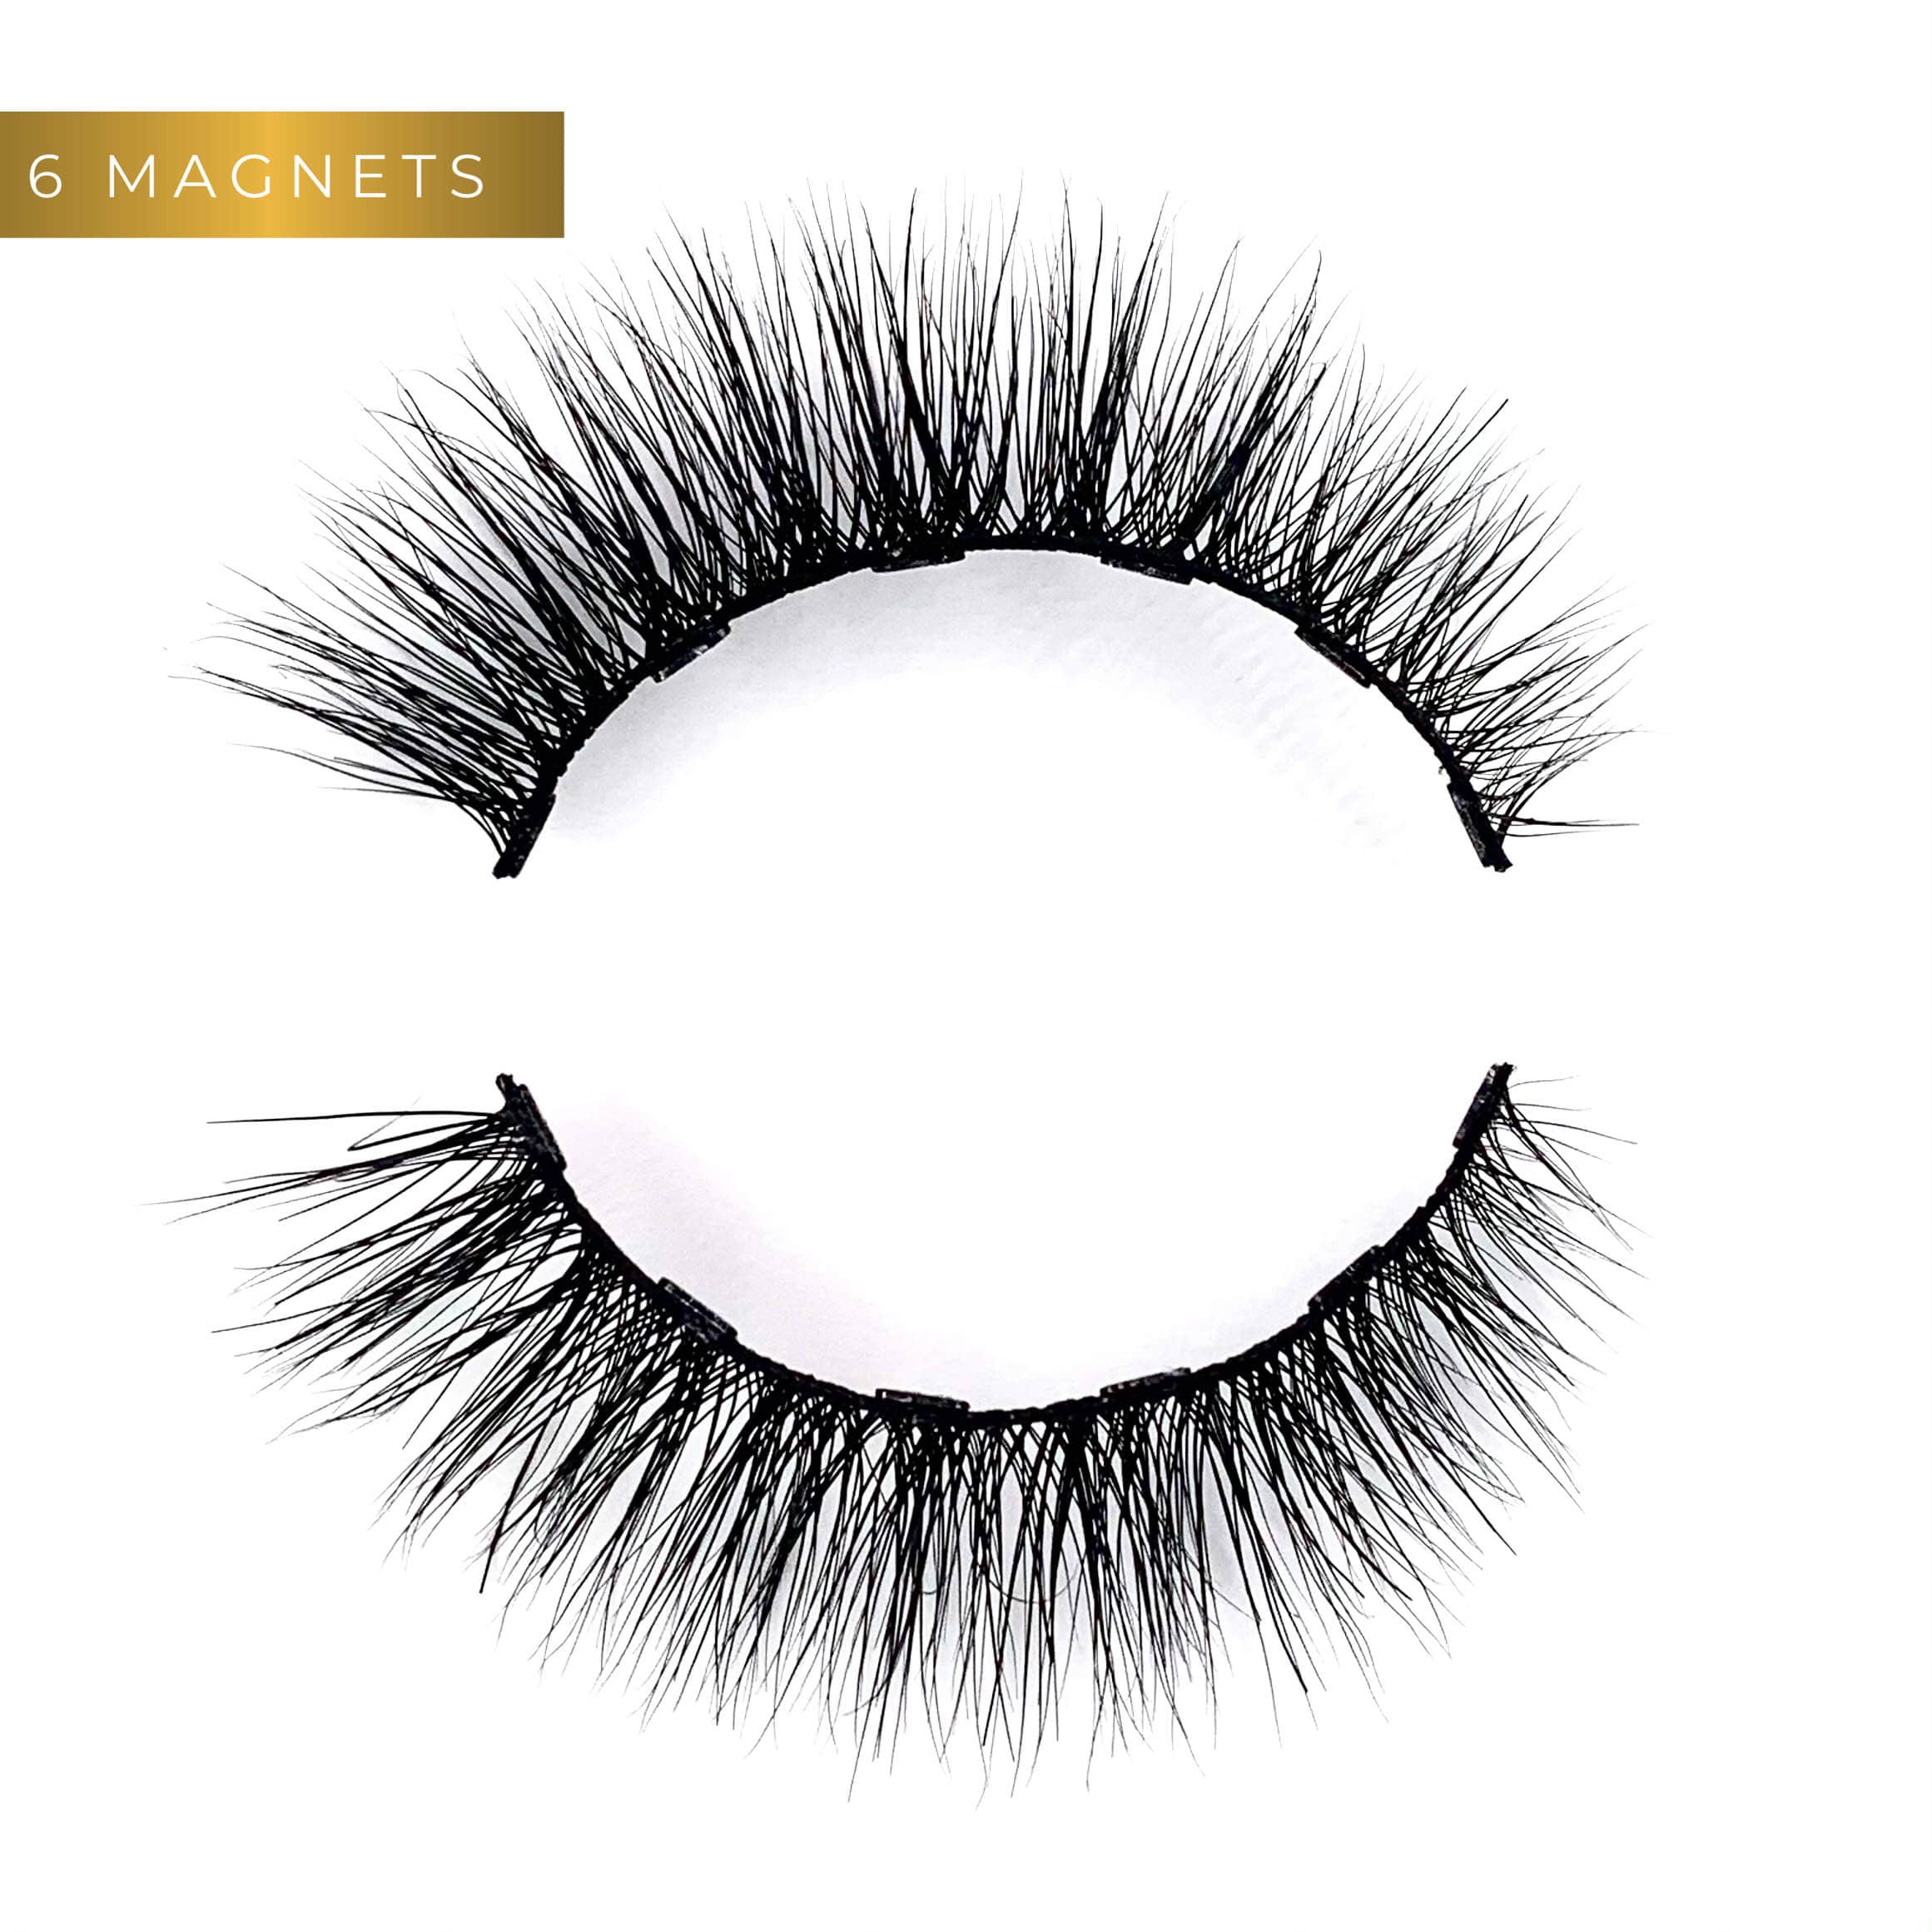 Avella Beauty, ATTRACT Magnetic Lash Kit, Luxury 3D Lashes, Avella Beauty - Expert Designed Magnetic Lashes & Beauty products